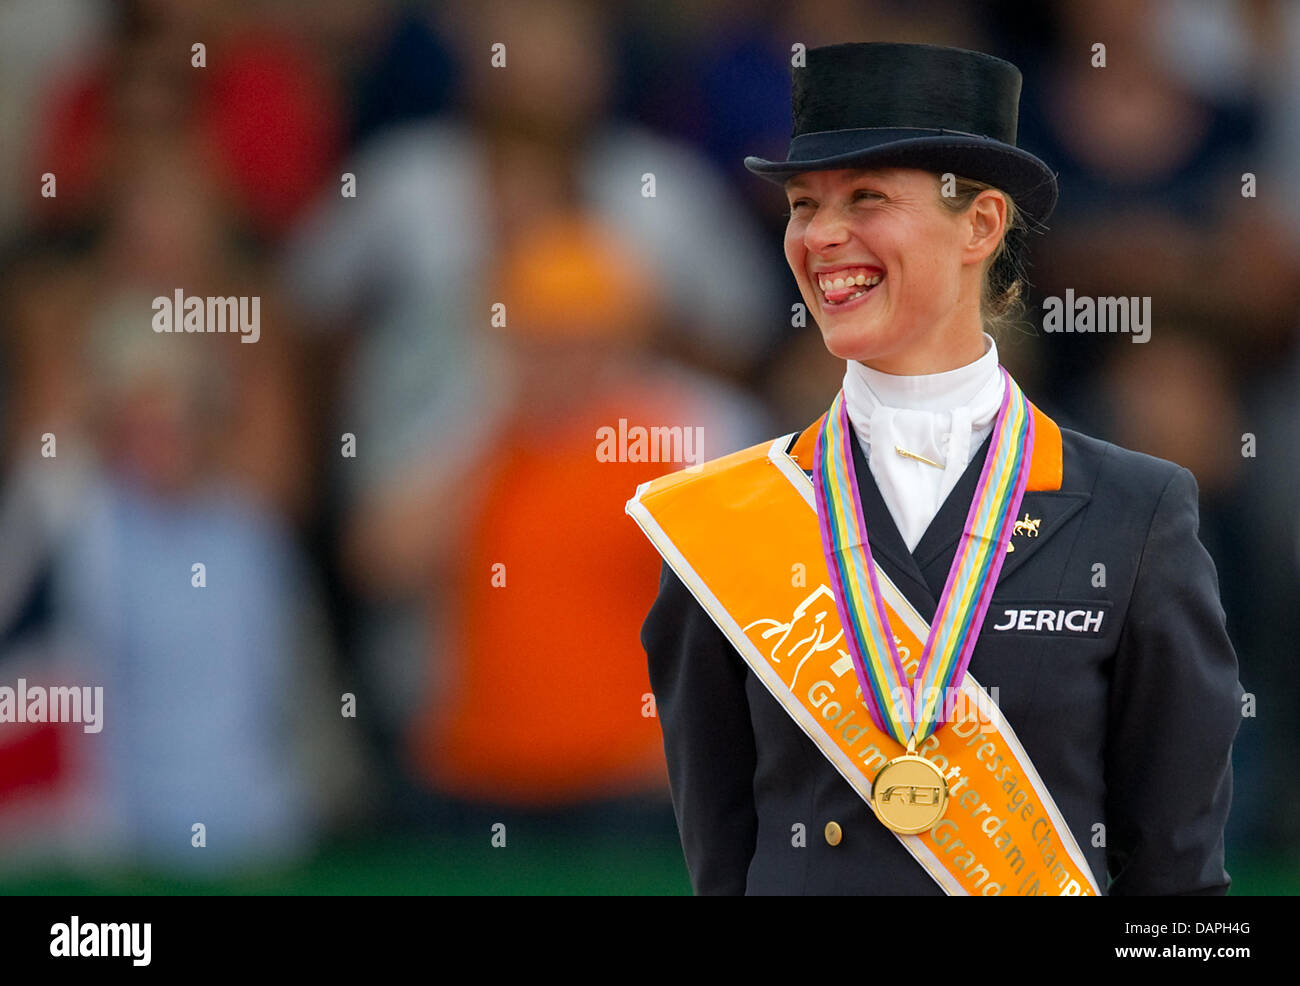 Dutch Adelinde Cornelissen smiles during award ceremony of the Grand Prix Special at the European Dressage Championship in Rotterdam, Netherlands, 20 August 2011. Cornelissen took first place. Photo: Uwe Anspach Stock Photo